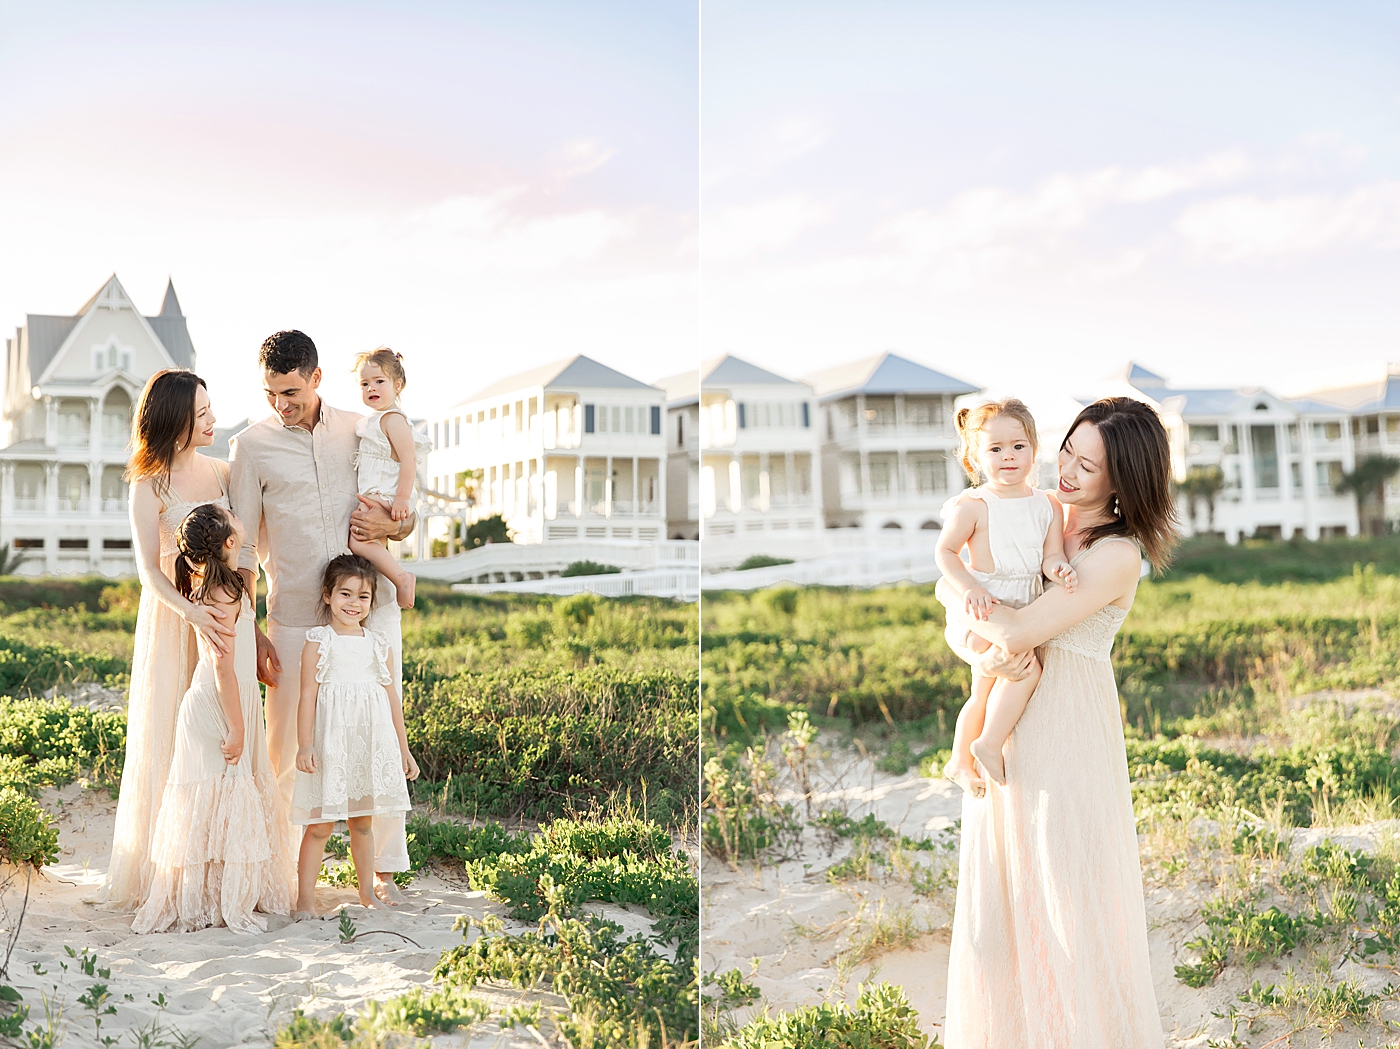 Mom and Dad adoring their children on the beach. Photos by Fresh Light Photography.